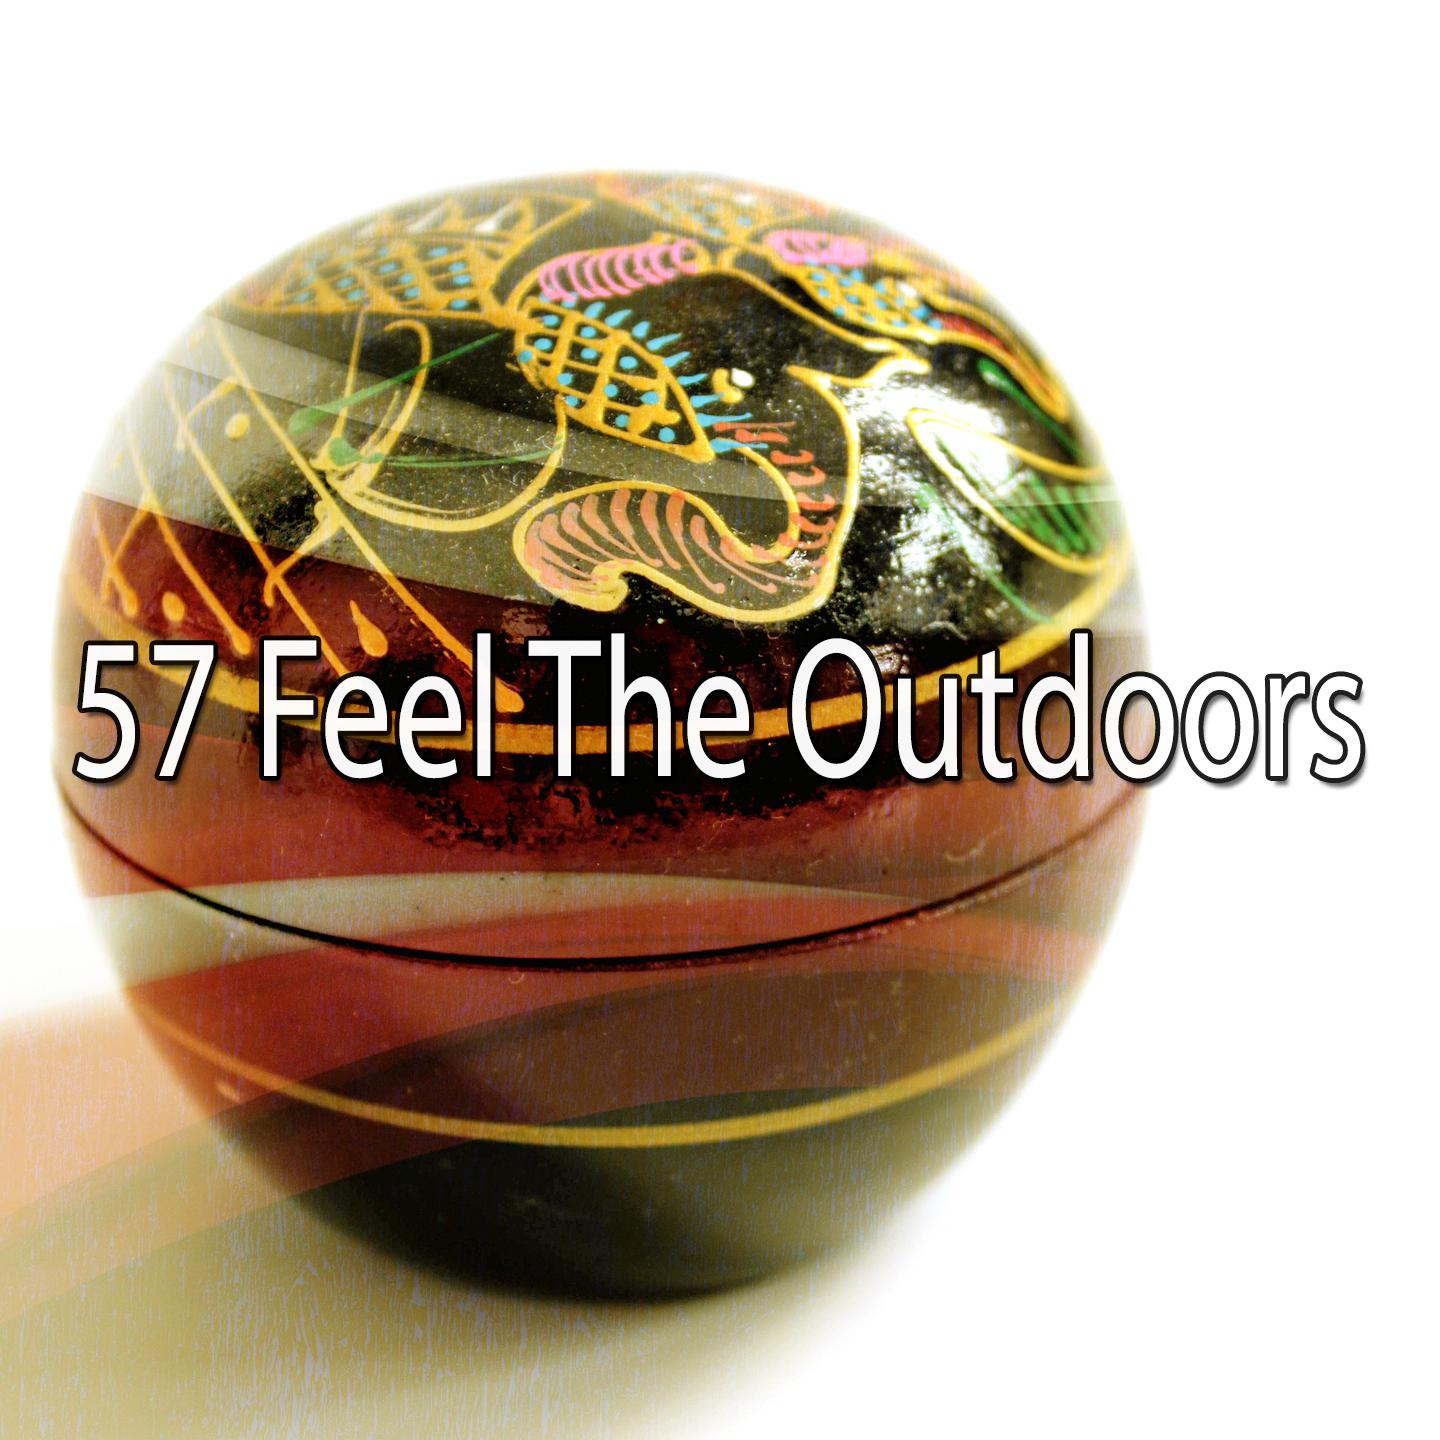 57 Feel the Outdoors